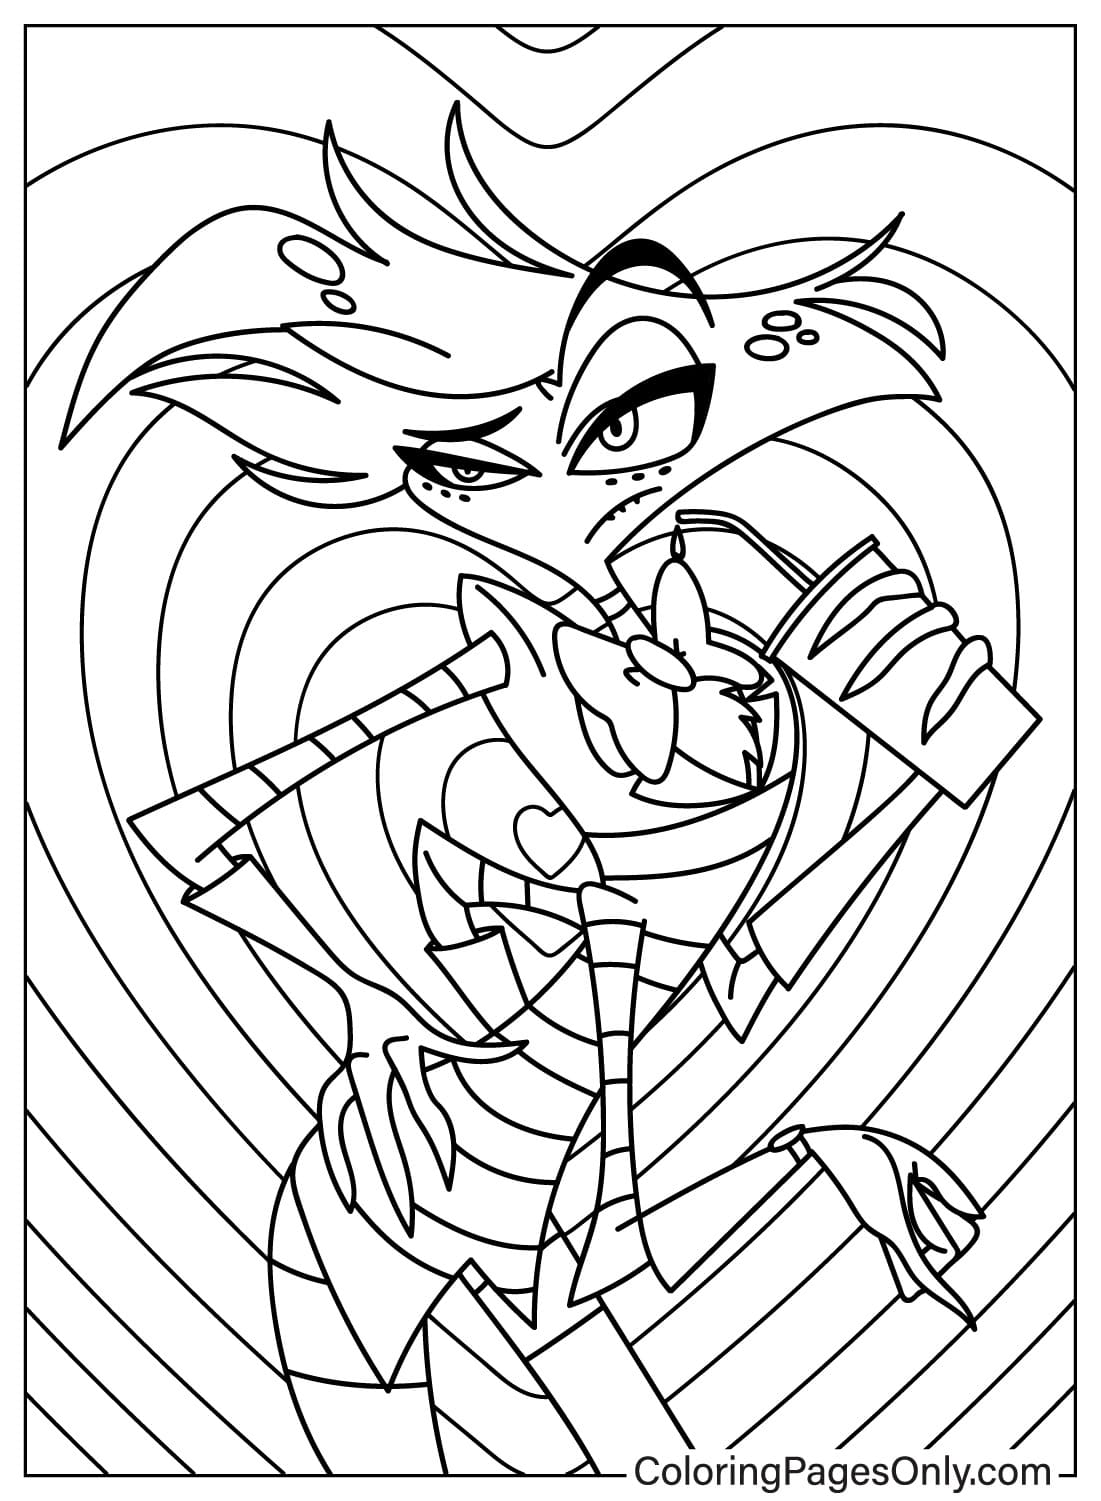 Pictures Angel Dust Coloring Page from Angel Dust